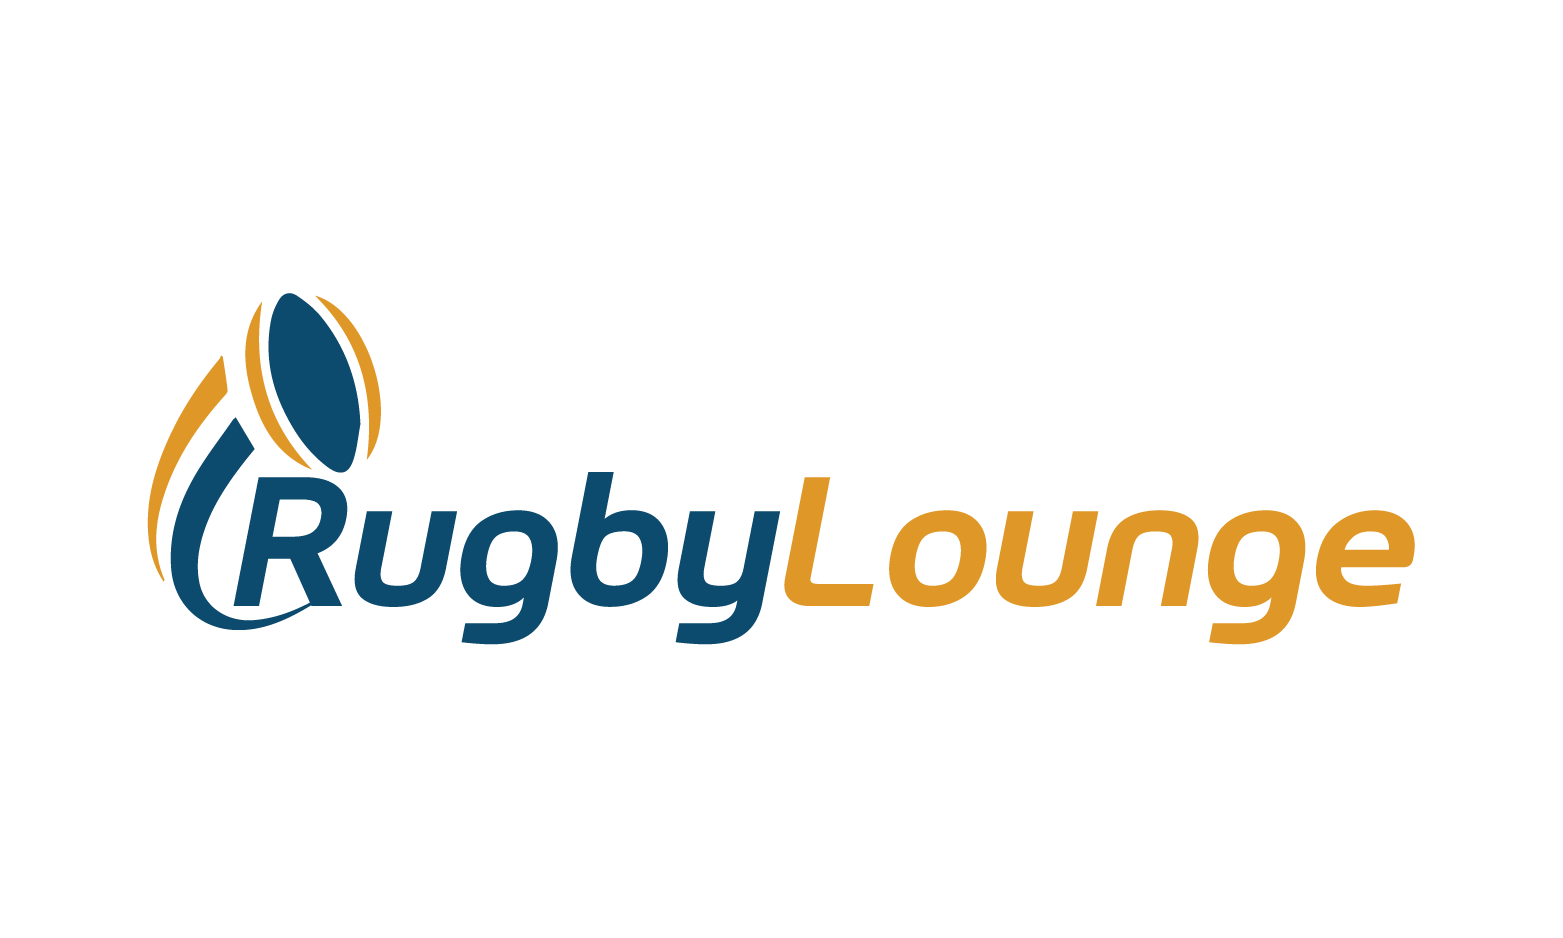 RugbyLounge.com - Creative brandable domain for sale